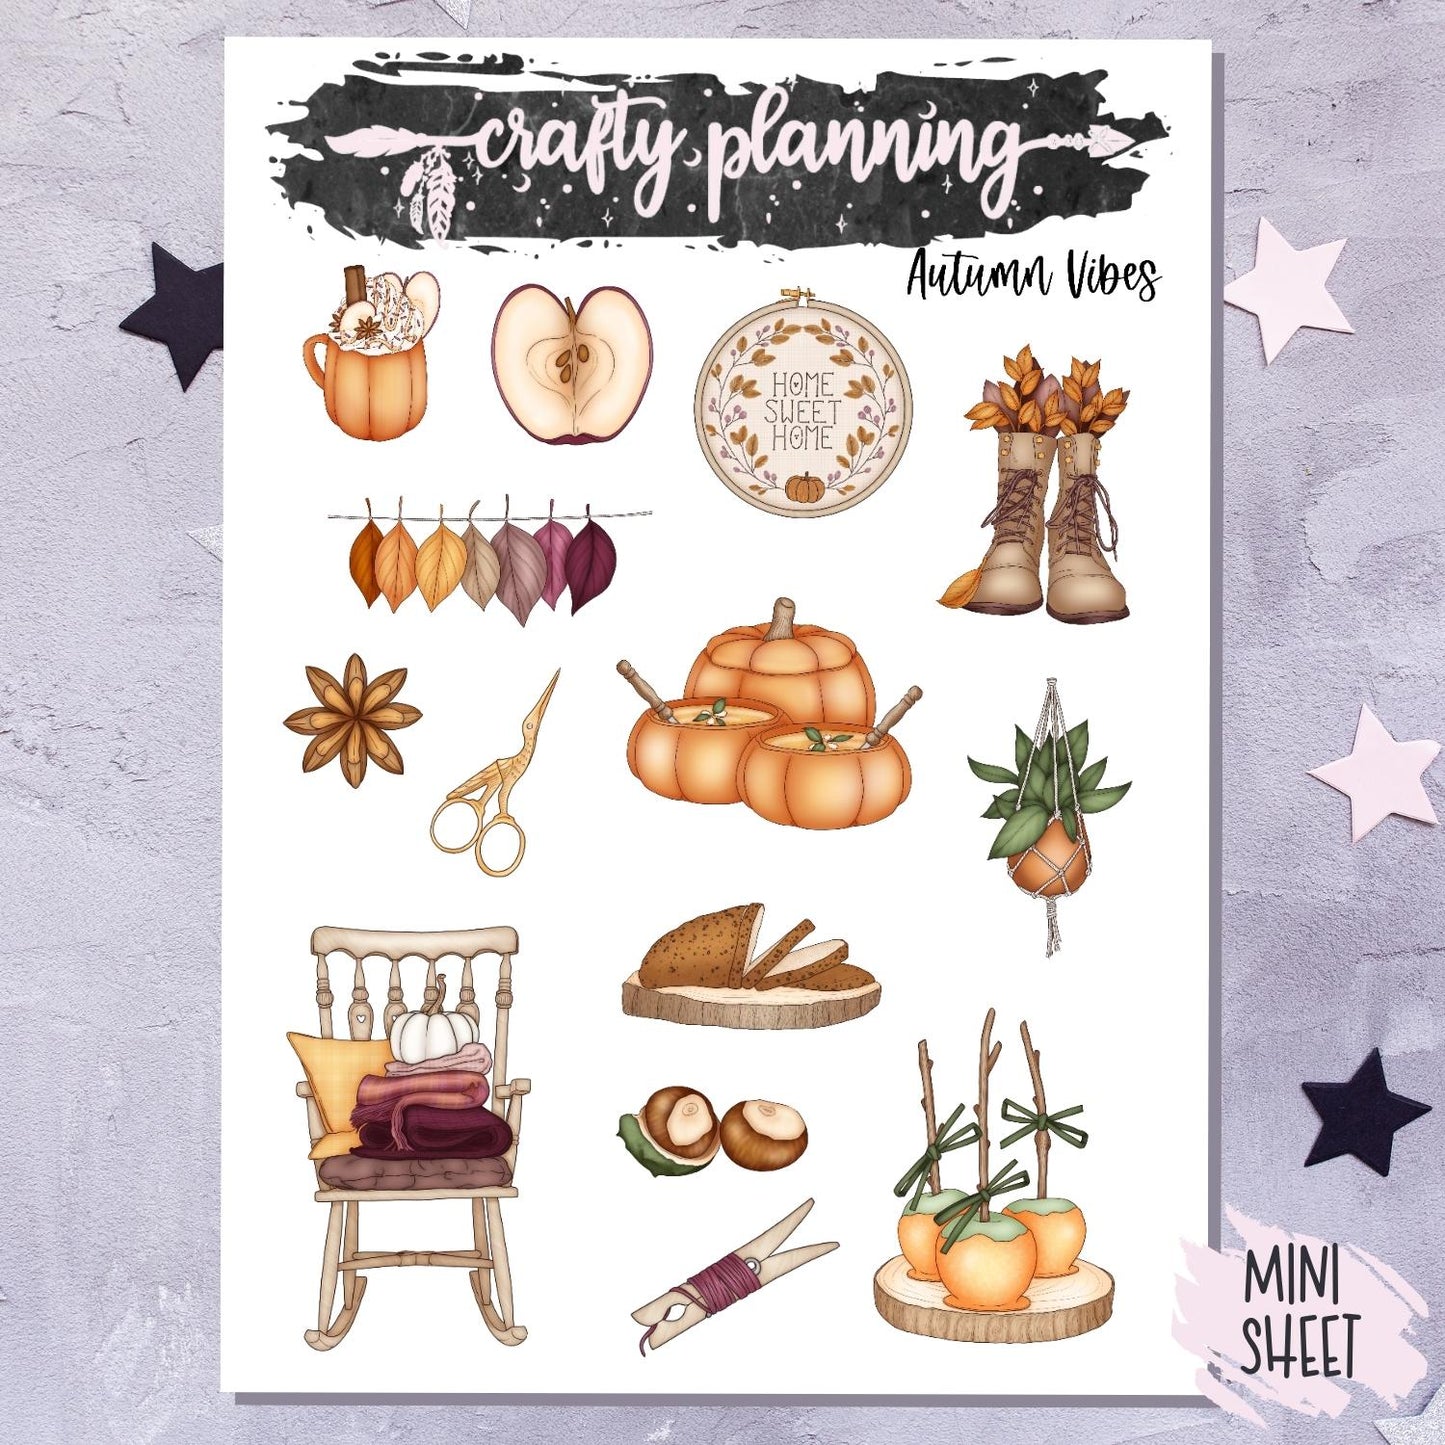 Autumn Vibes - A La Carte - Weekly Vertical Planner Kit